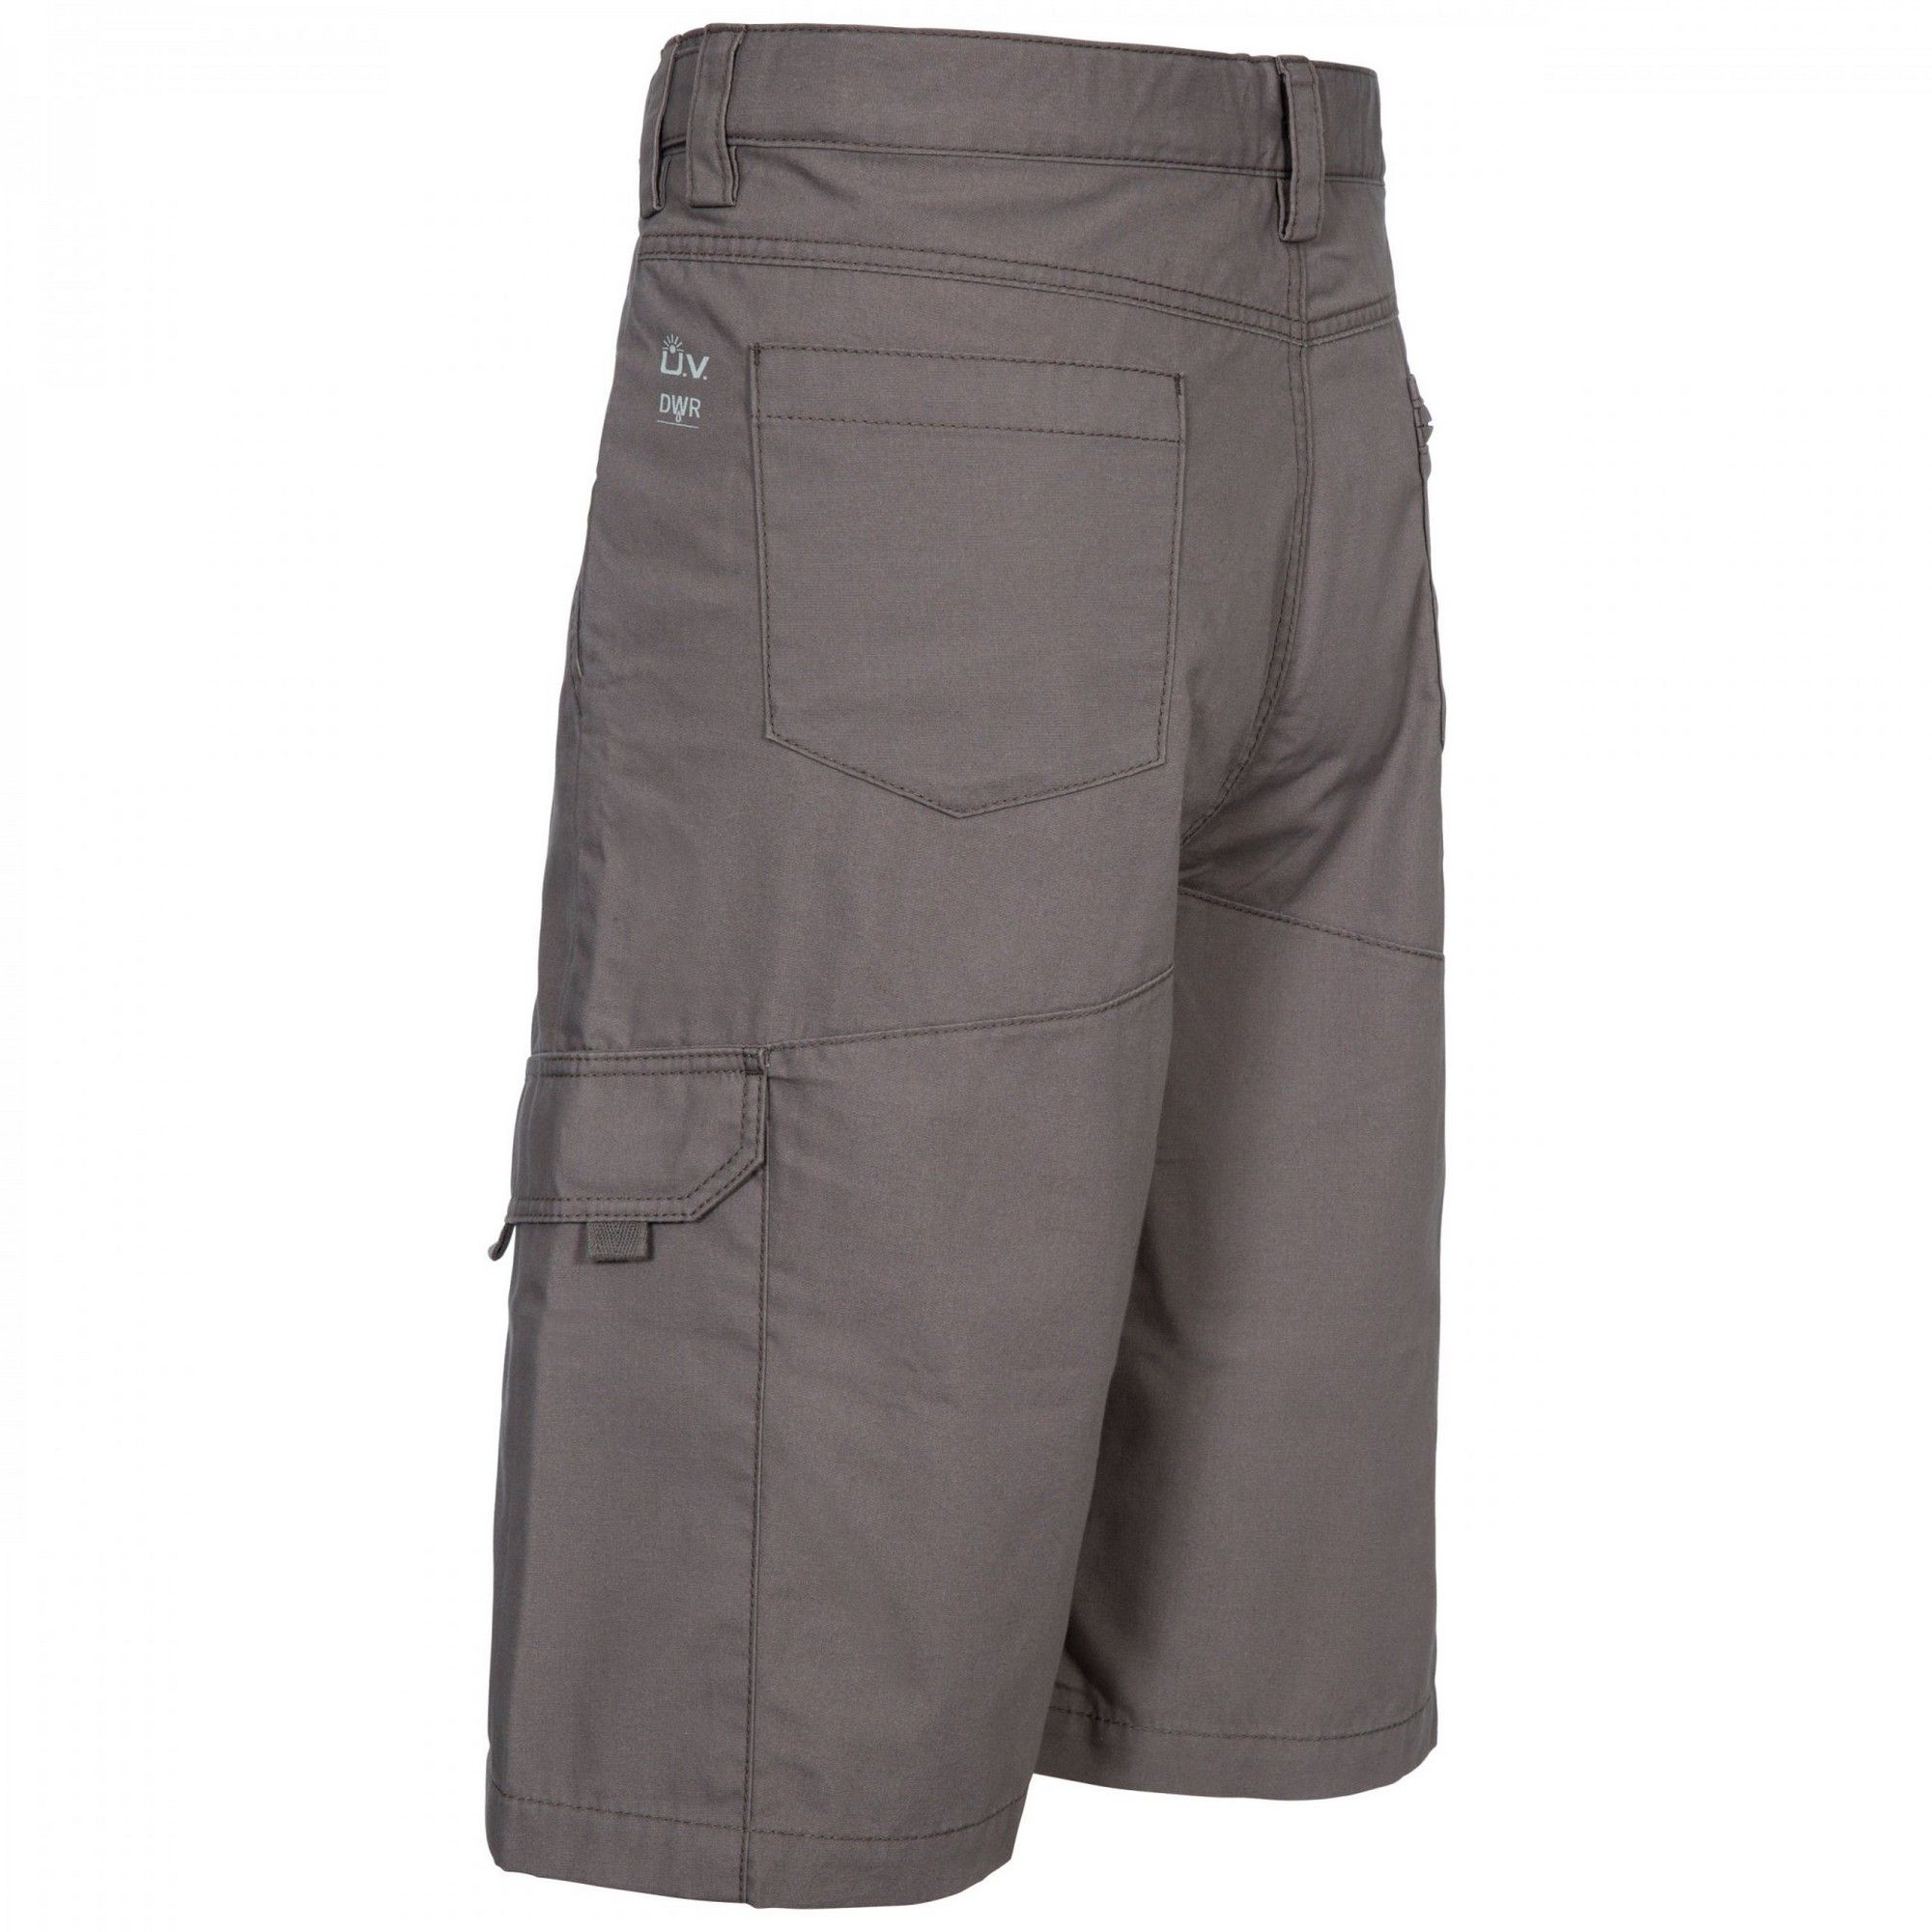 Flat waist with side adjusters. Front fly opening. 1 concealed zip pocket. 2 side pockets. 2 cargo pockets. UV 40+. DWR finish. Quick dry. 65% Polyester, 35% Cotton. Trespass Mens Waist Sizing (approx): S - 32in/81cm, M - 34in/86cm, L - 36in/91.5cm, XL - 38in/96.5cm, XXL - 40in/101.5cm, 3XL - 42in/106.5cm.